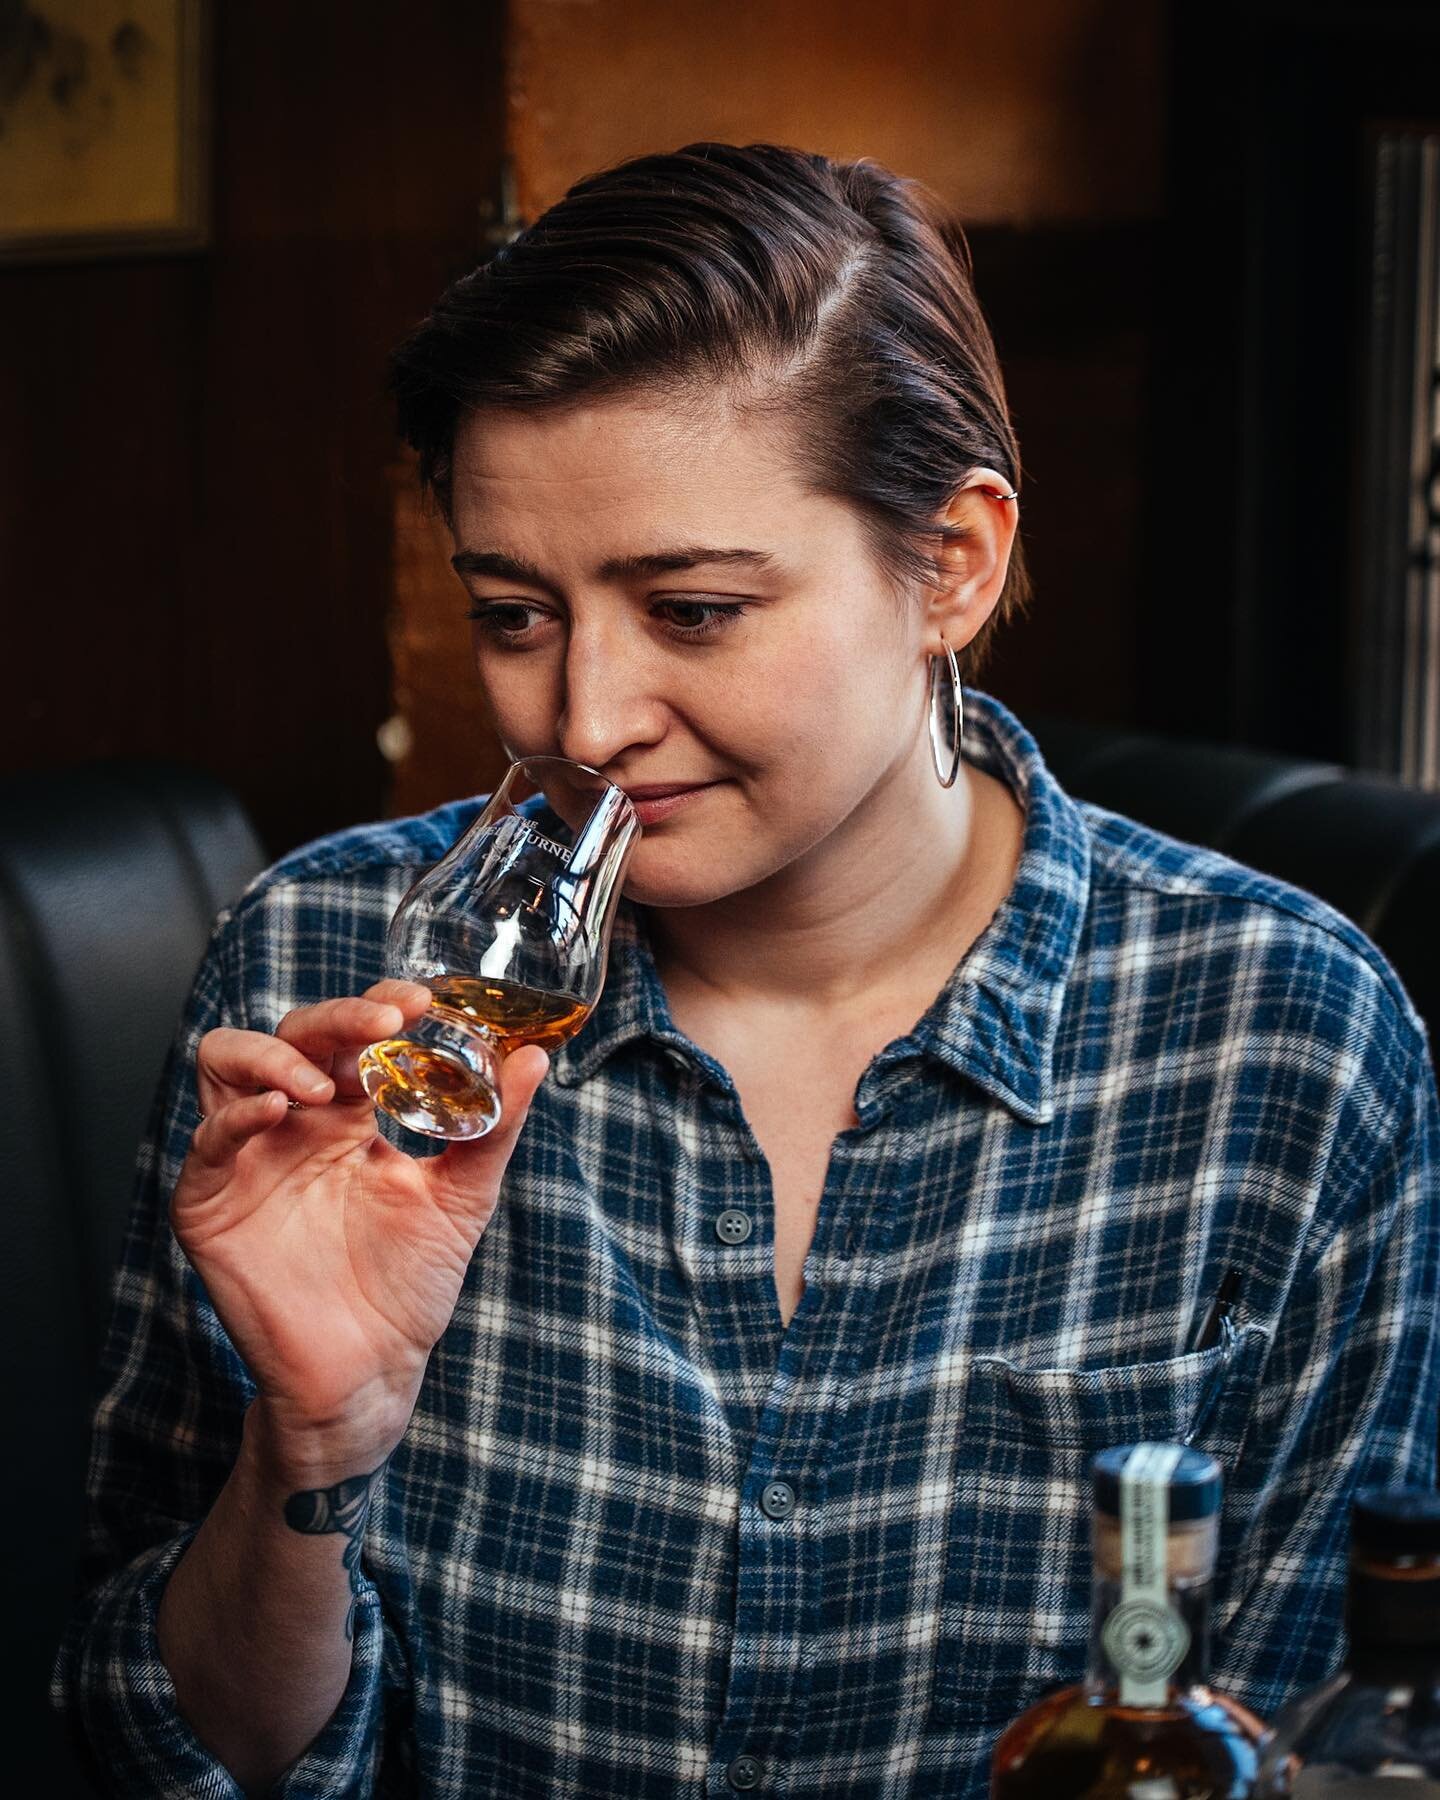 Come join us for an Irish experience like no other 🥃

You will be given an introduction to Irish whiskey along with a tasting board of three samples paired with a local beer of your choice.

Link in bio to book yours now!

#shelbournebar #shelbourne